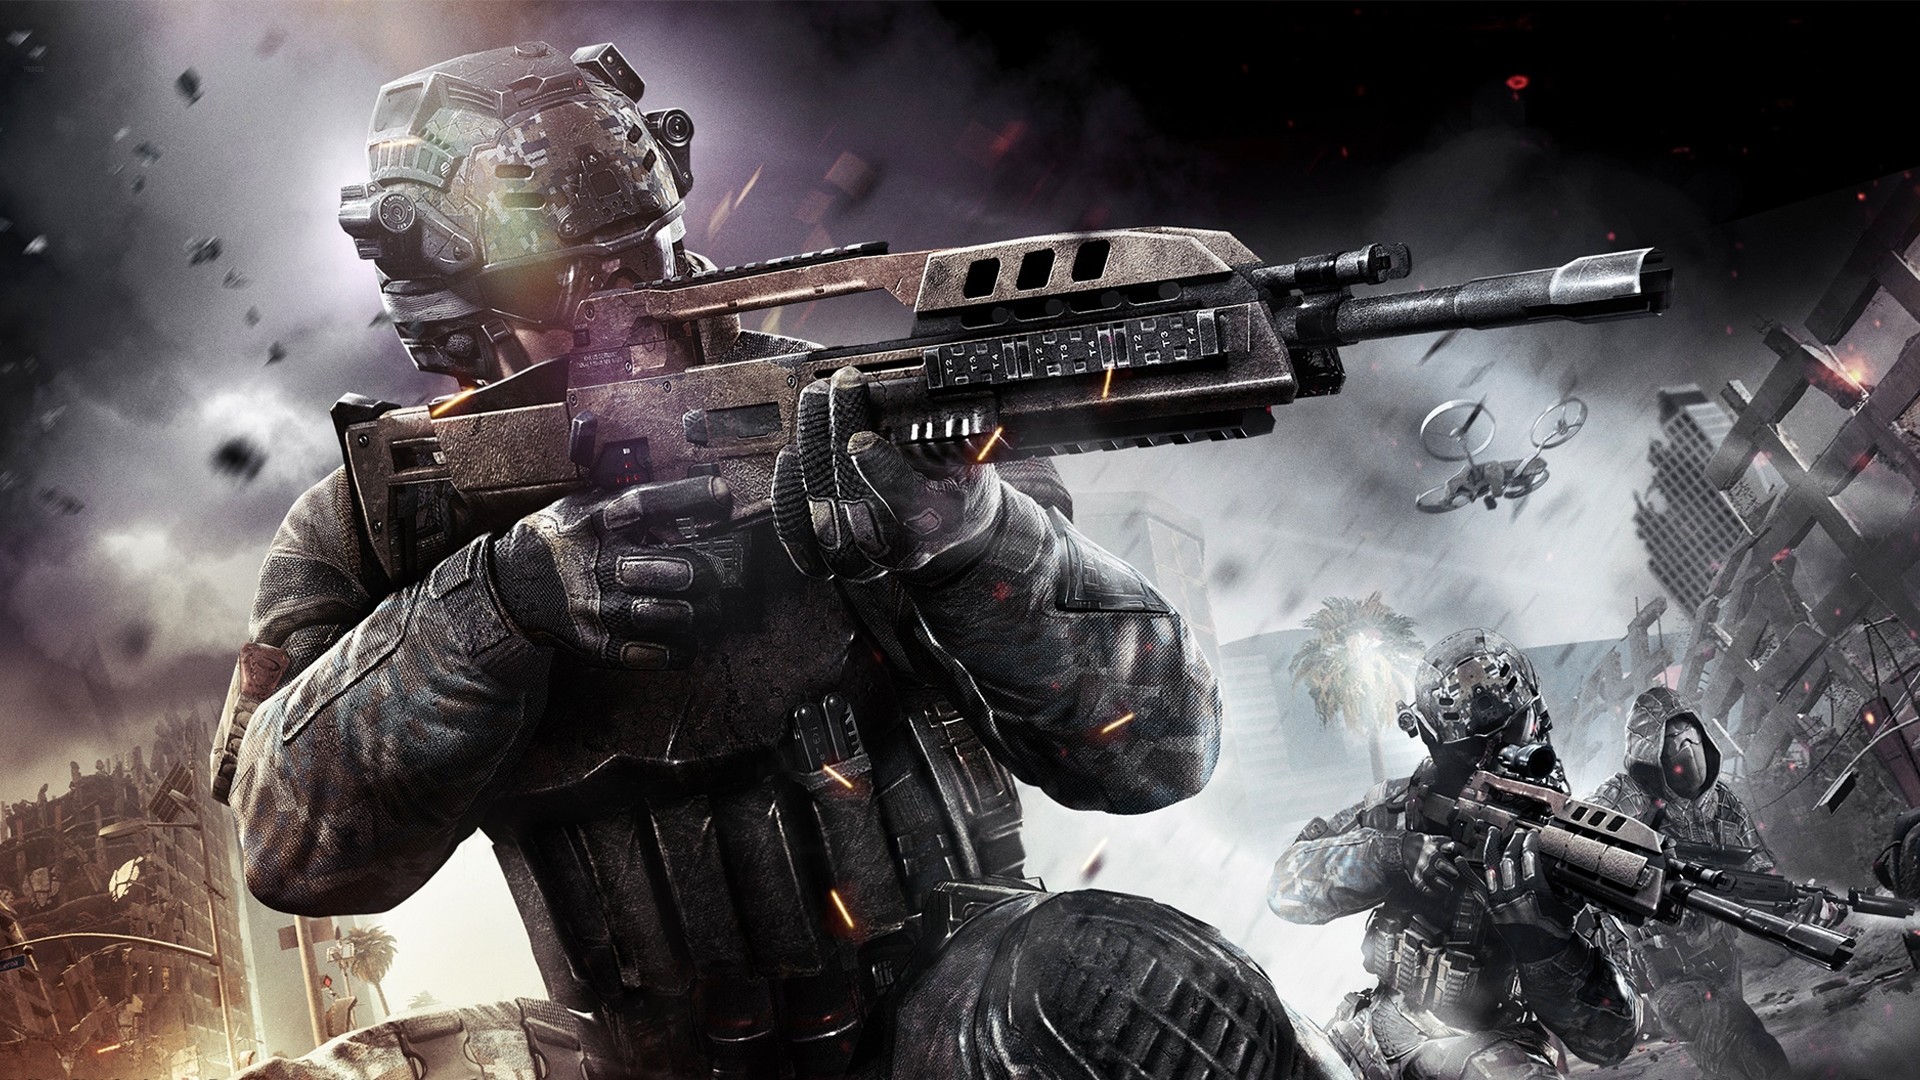 1920x1080 87+ Best HD Call of Duty Black Ops 2 Video Game Wallpapers, 9185 